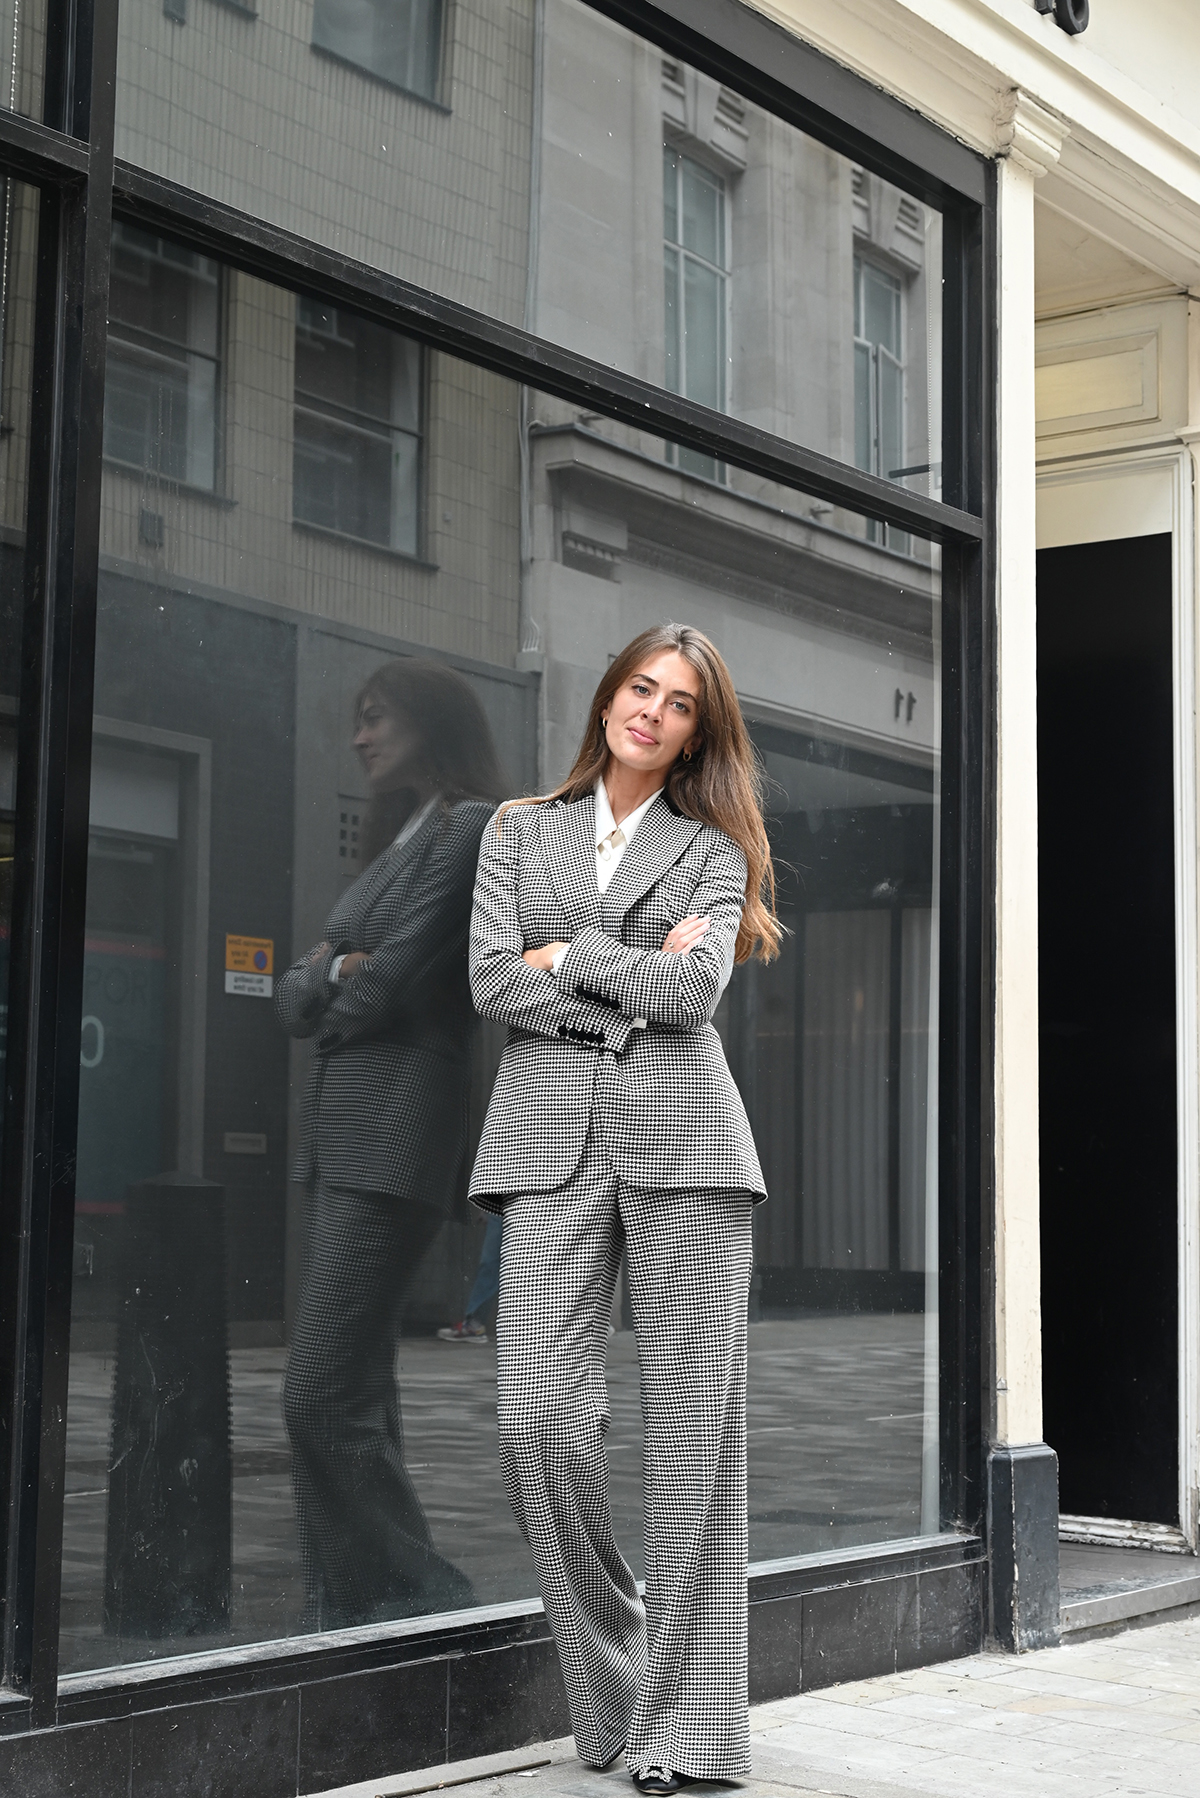 A girl standing in front of a large window wearing a grey striped suit